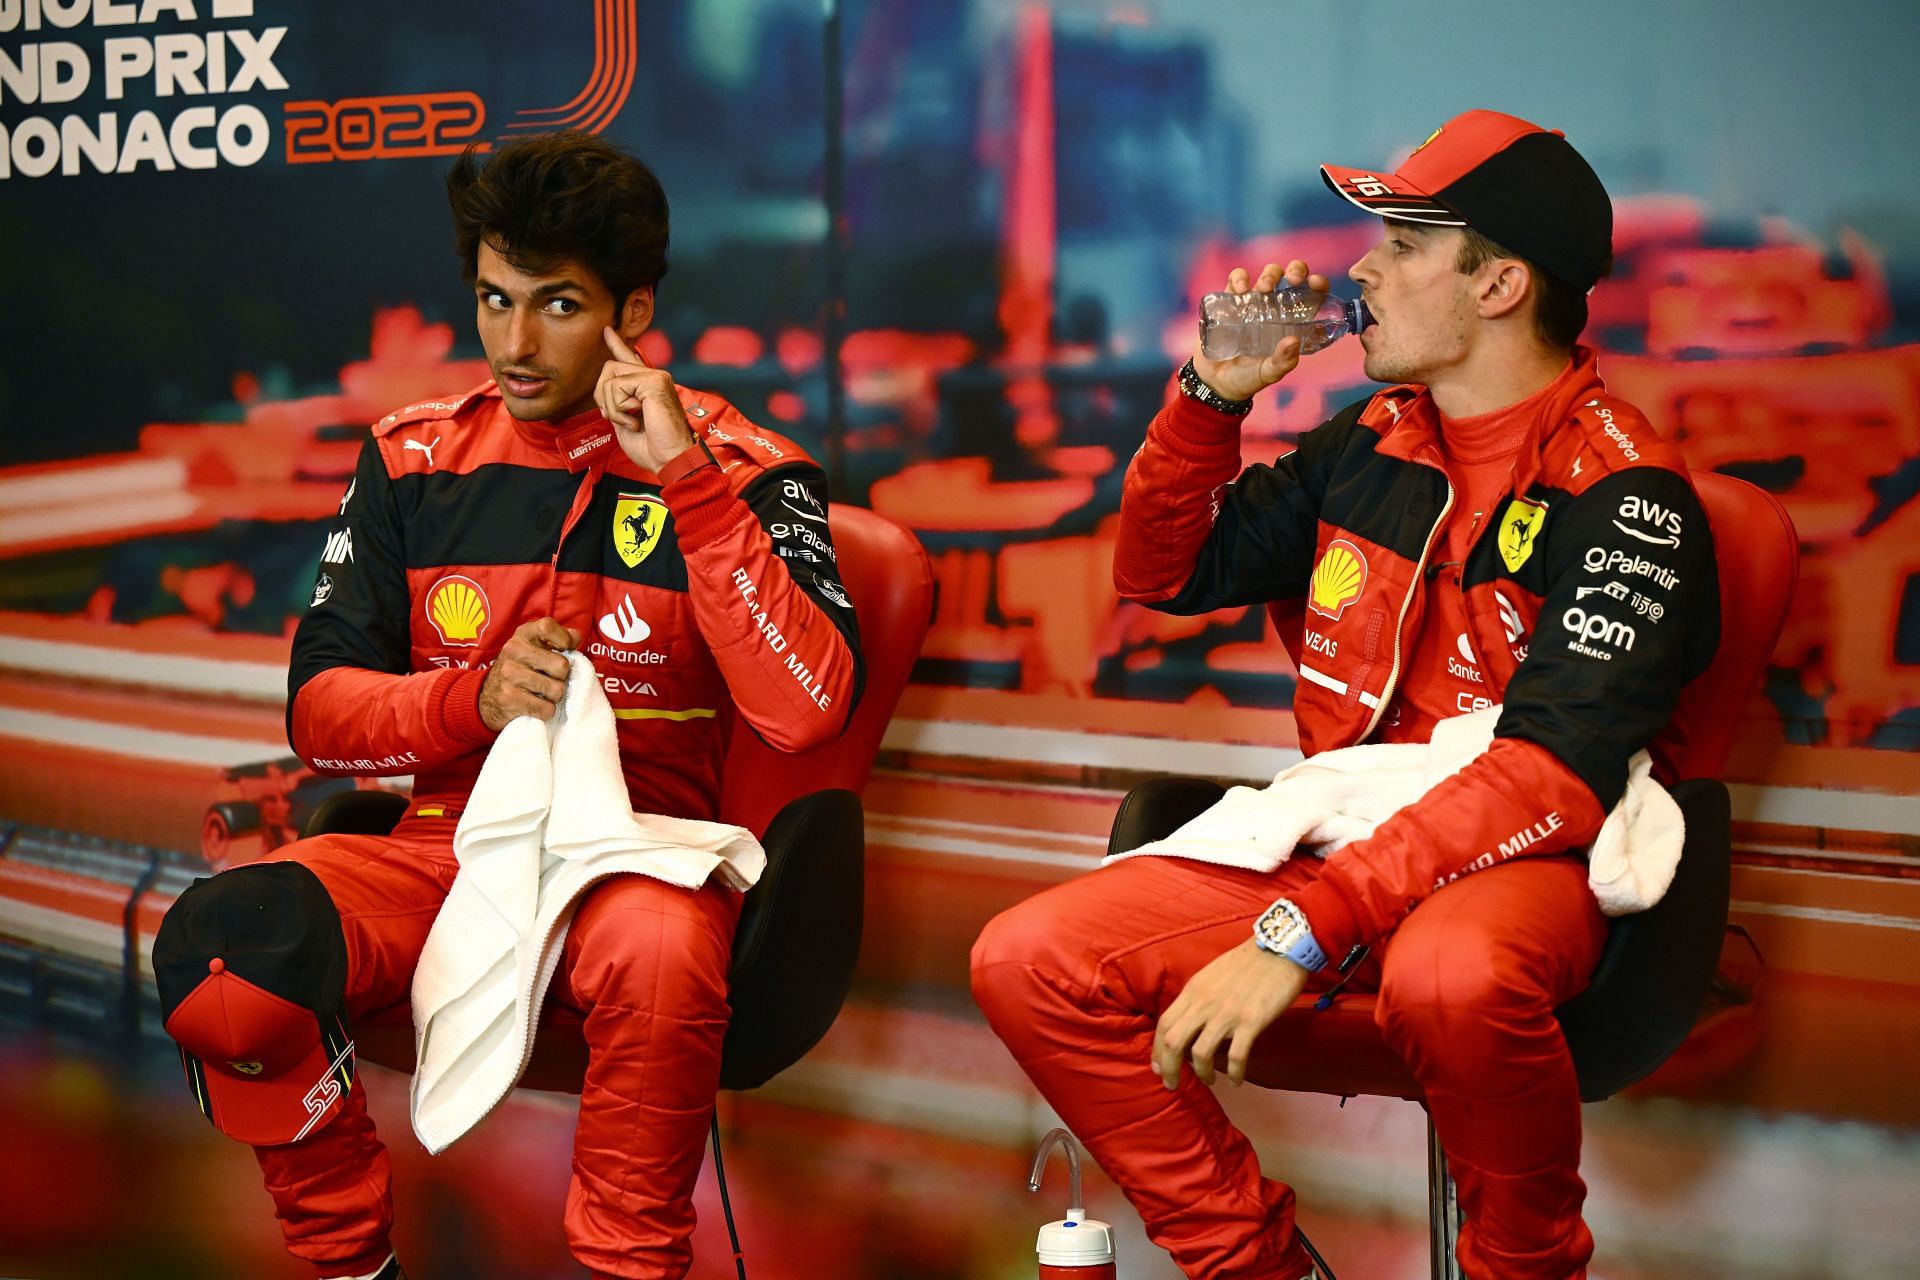 Carlos Sainz (left) feels the relationship with Charles Leclerc (right) has been as good as ever before